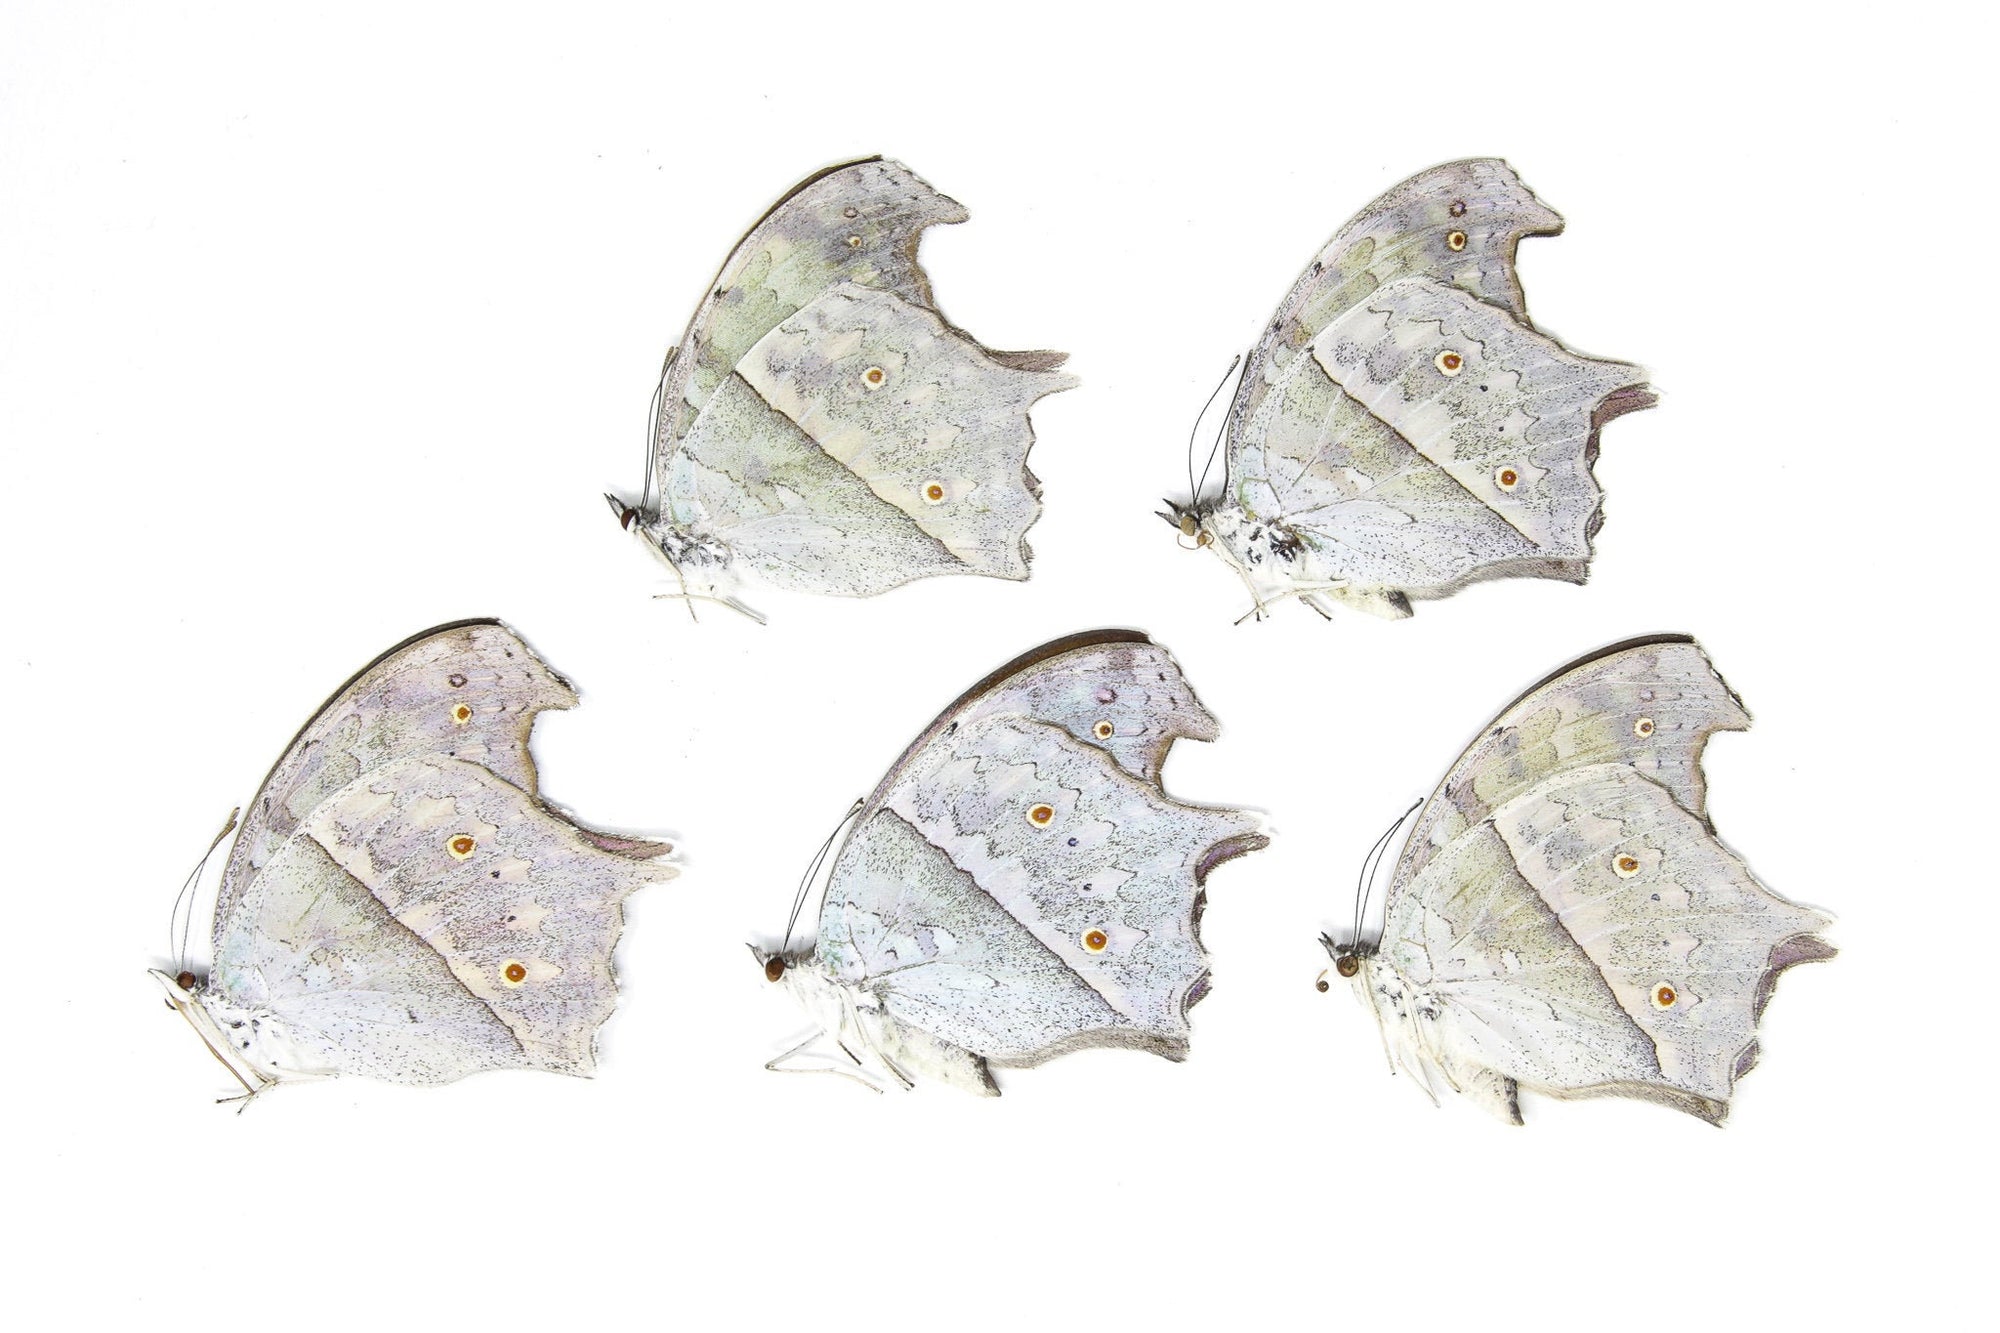 5 x Protogoniomorpha parhassus | The Forest Mother-of-Pearl Butterflies | A1 Unmounted Specimens